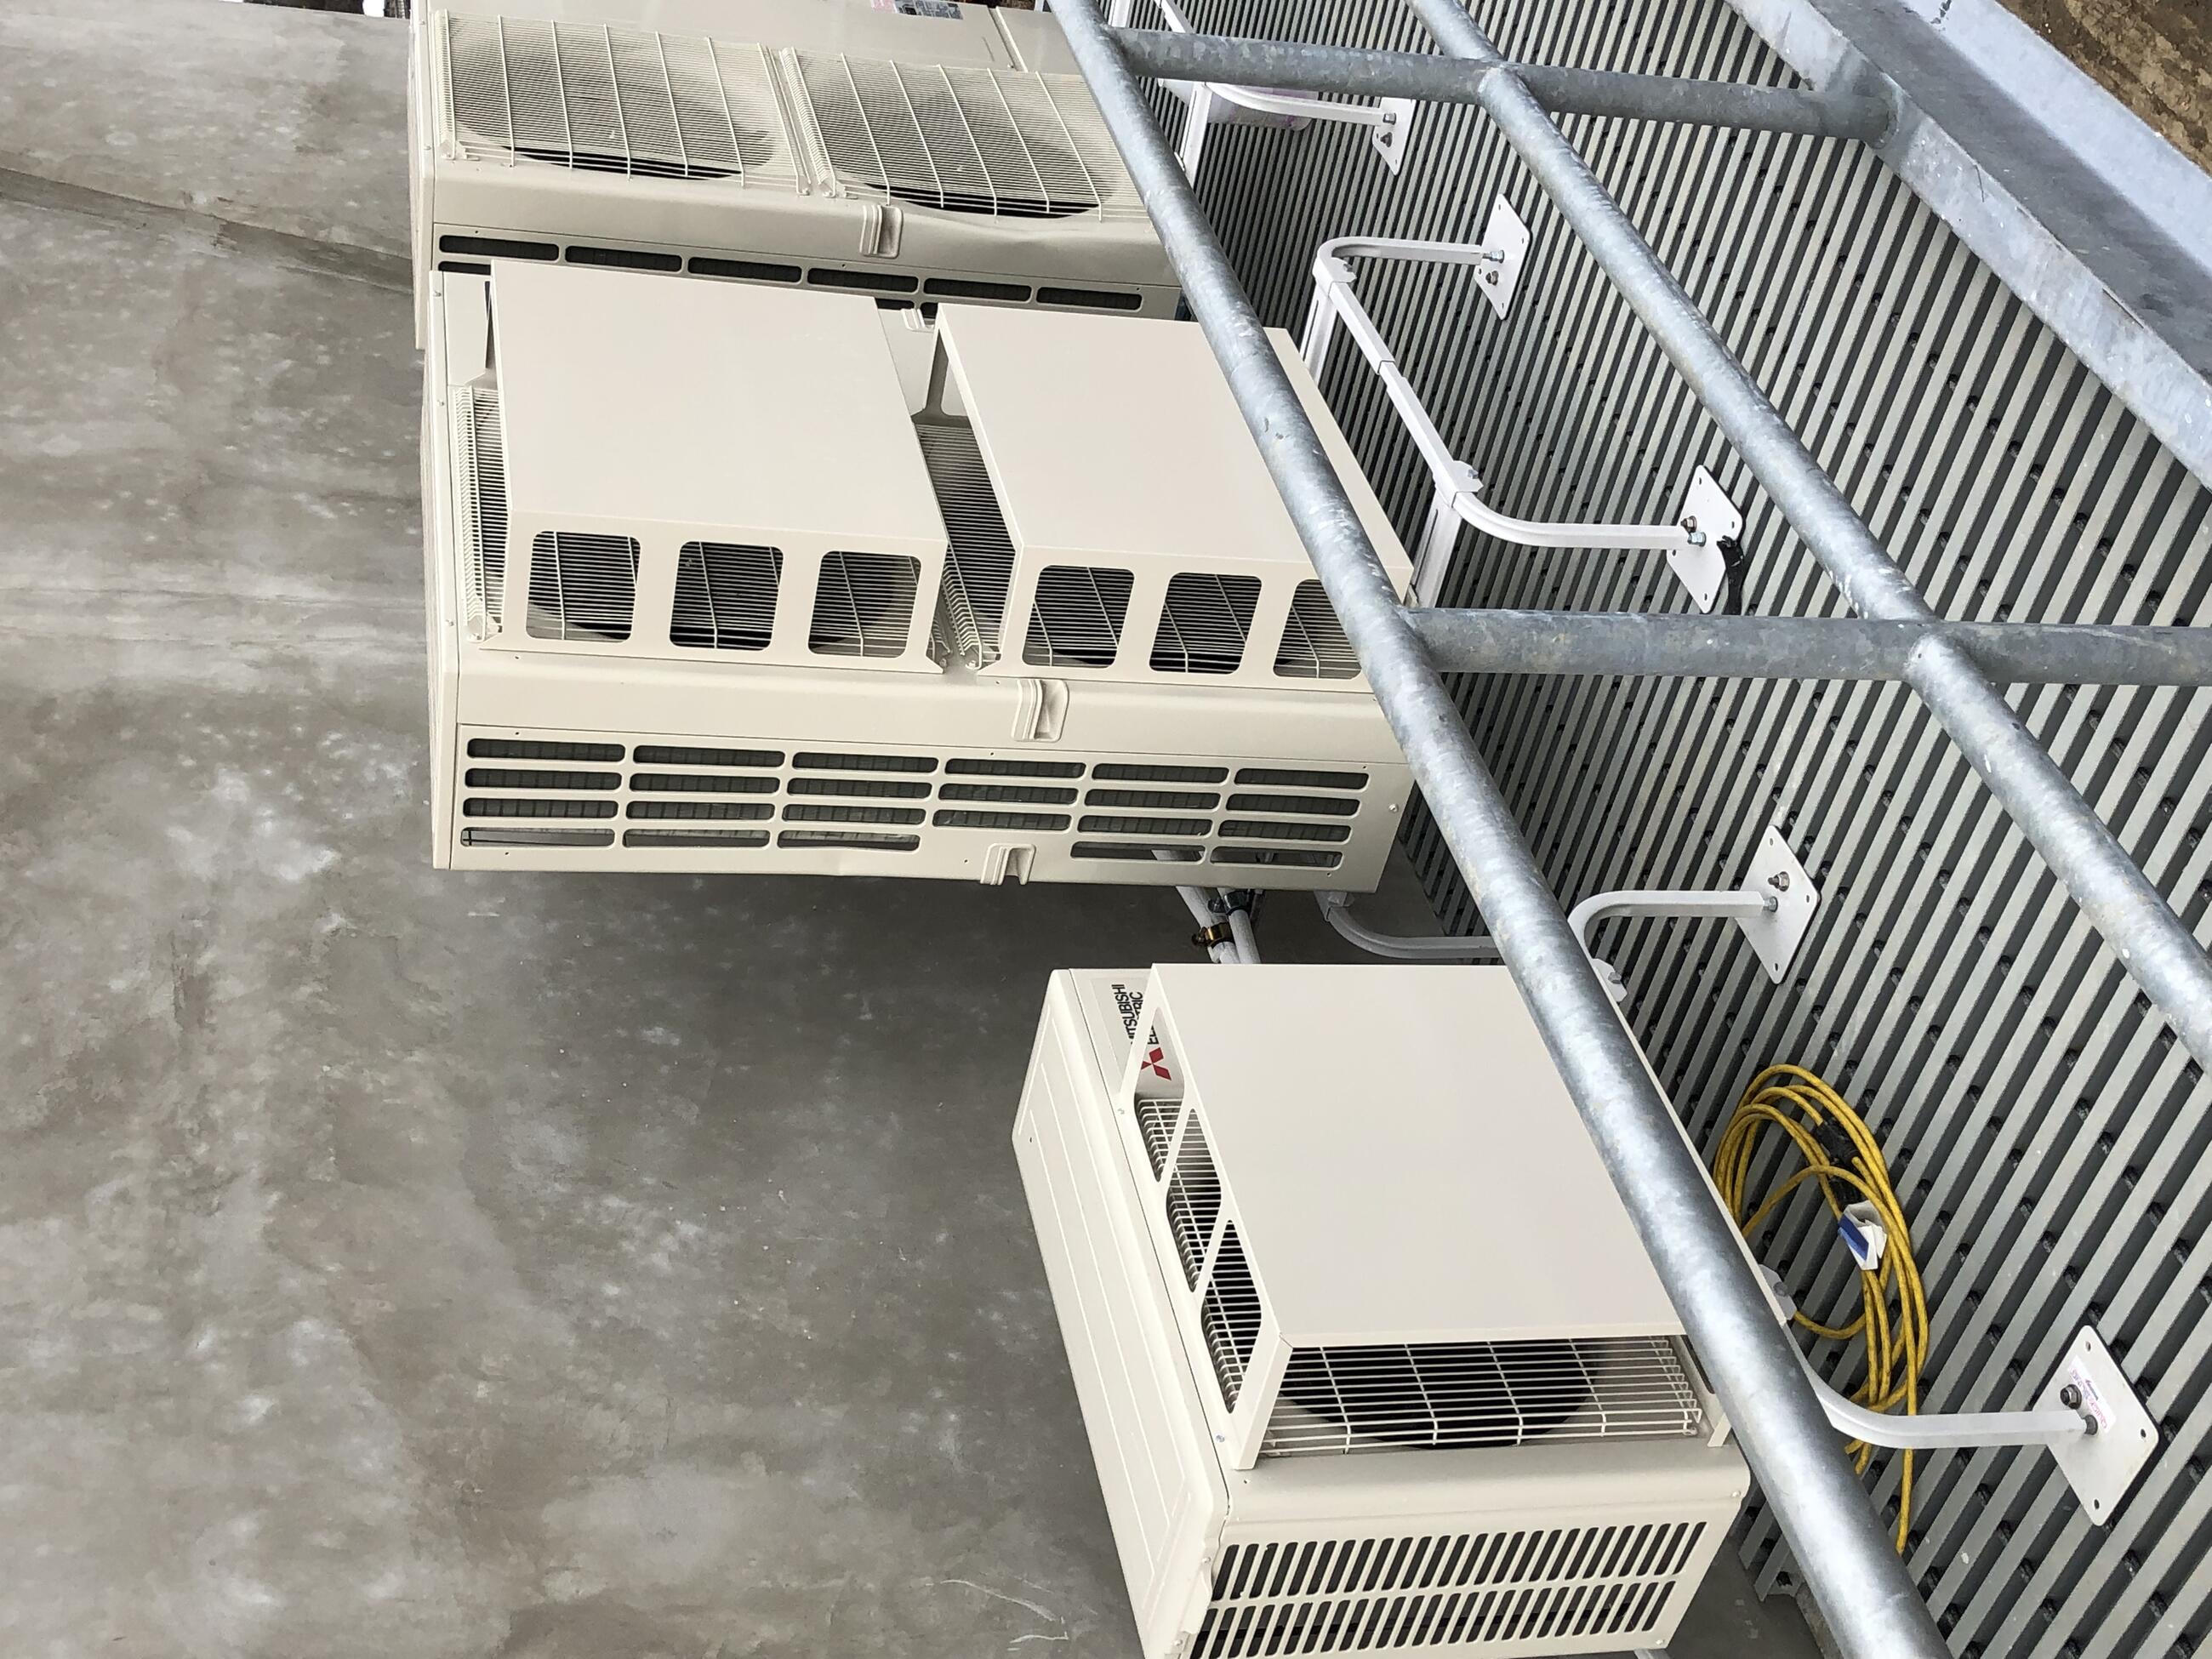 Three HVAC units are shown installed over a metal grate next to a cement wall. The units are bolted to metal legs that lift them off the grate to allow for improved airflow.